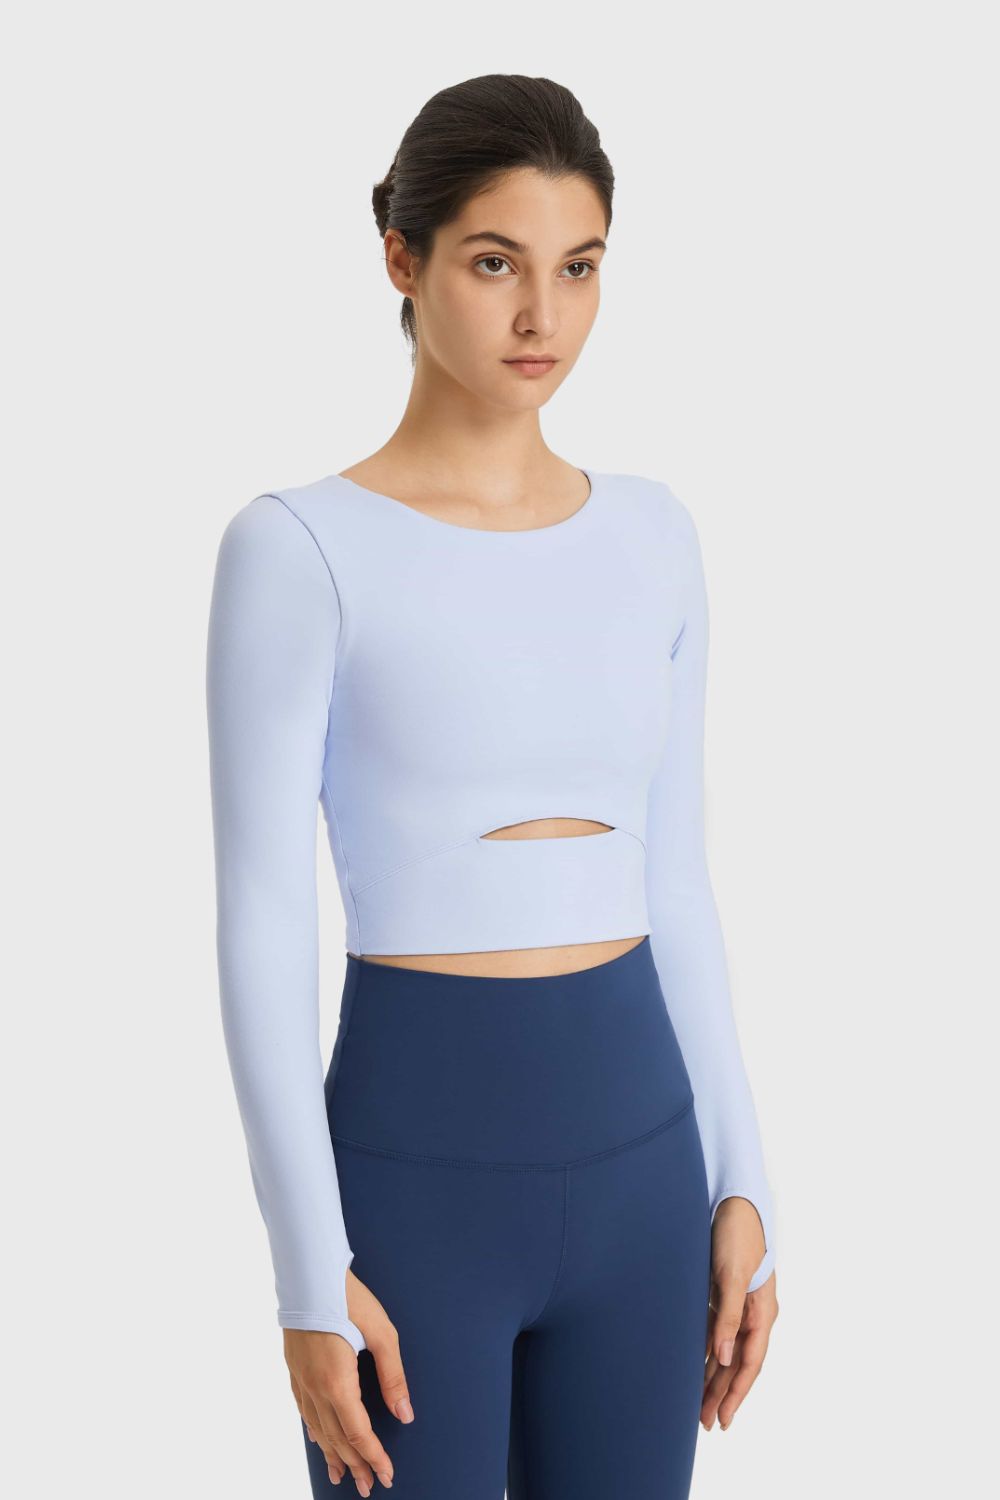 Cropped Long Sleeve | Yoga Top